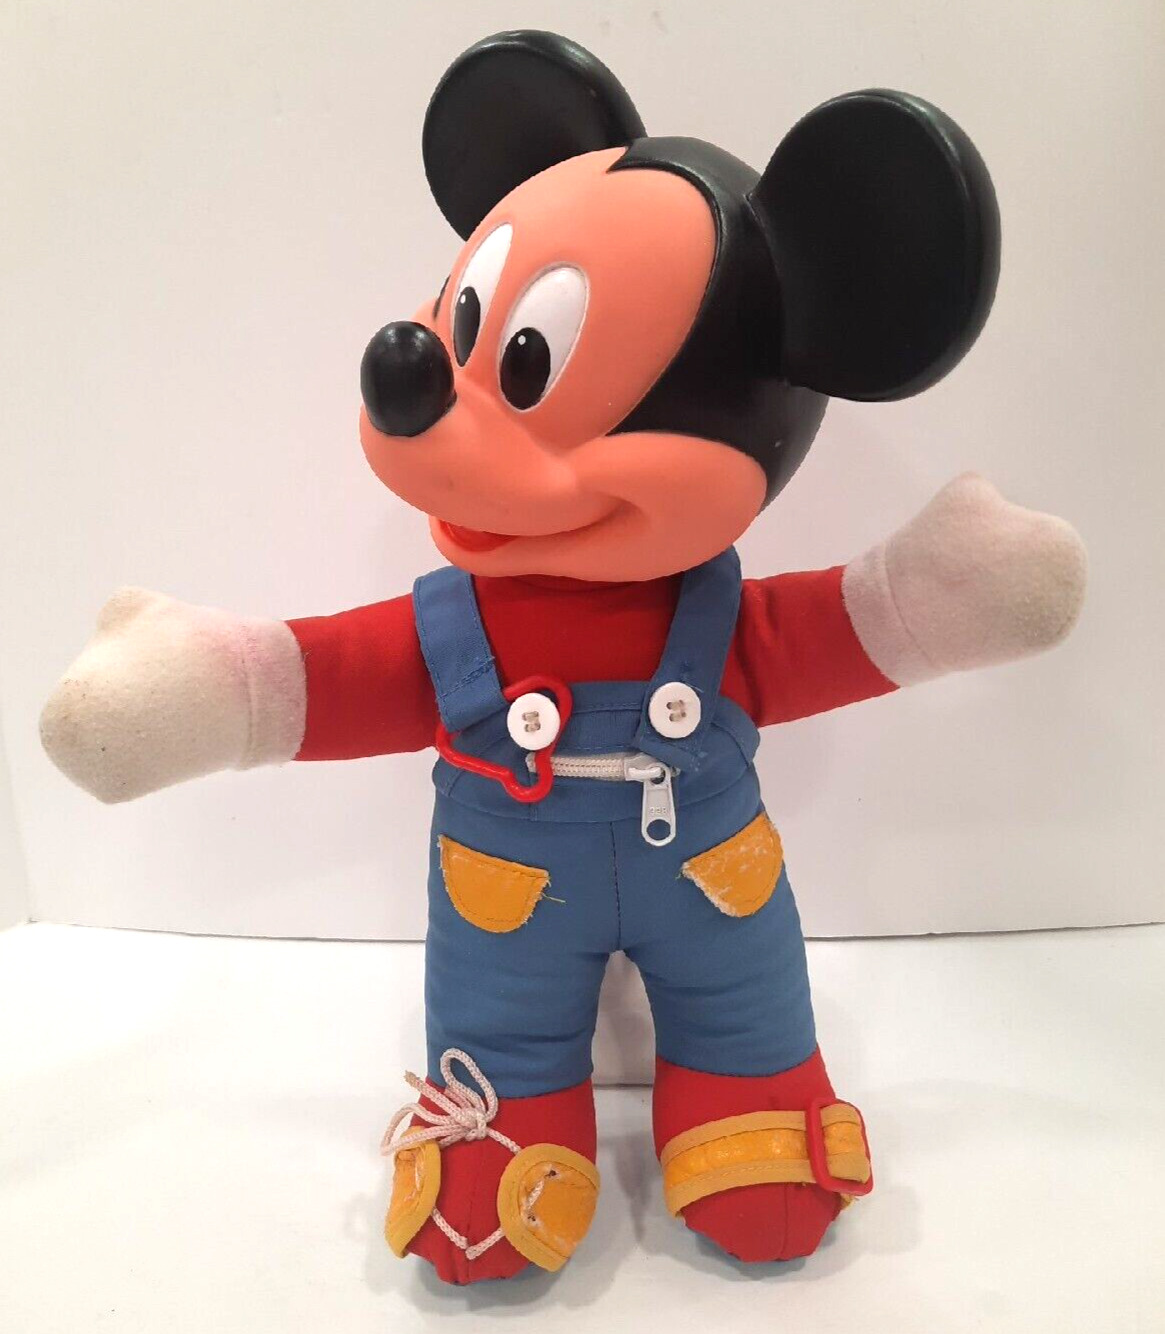 Vintage Mattel Mickey Mouse Learn To Dress Soft Body Hard Head Doll 15 in.